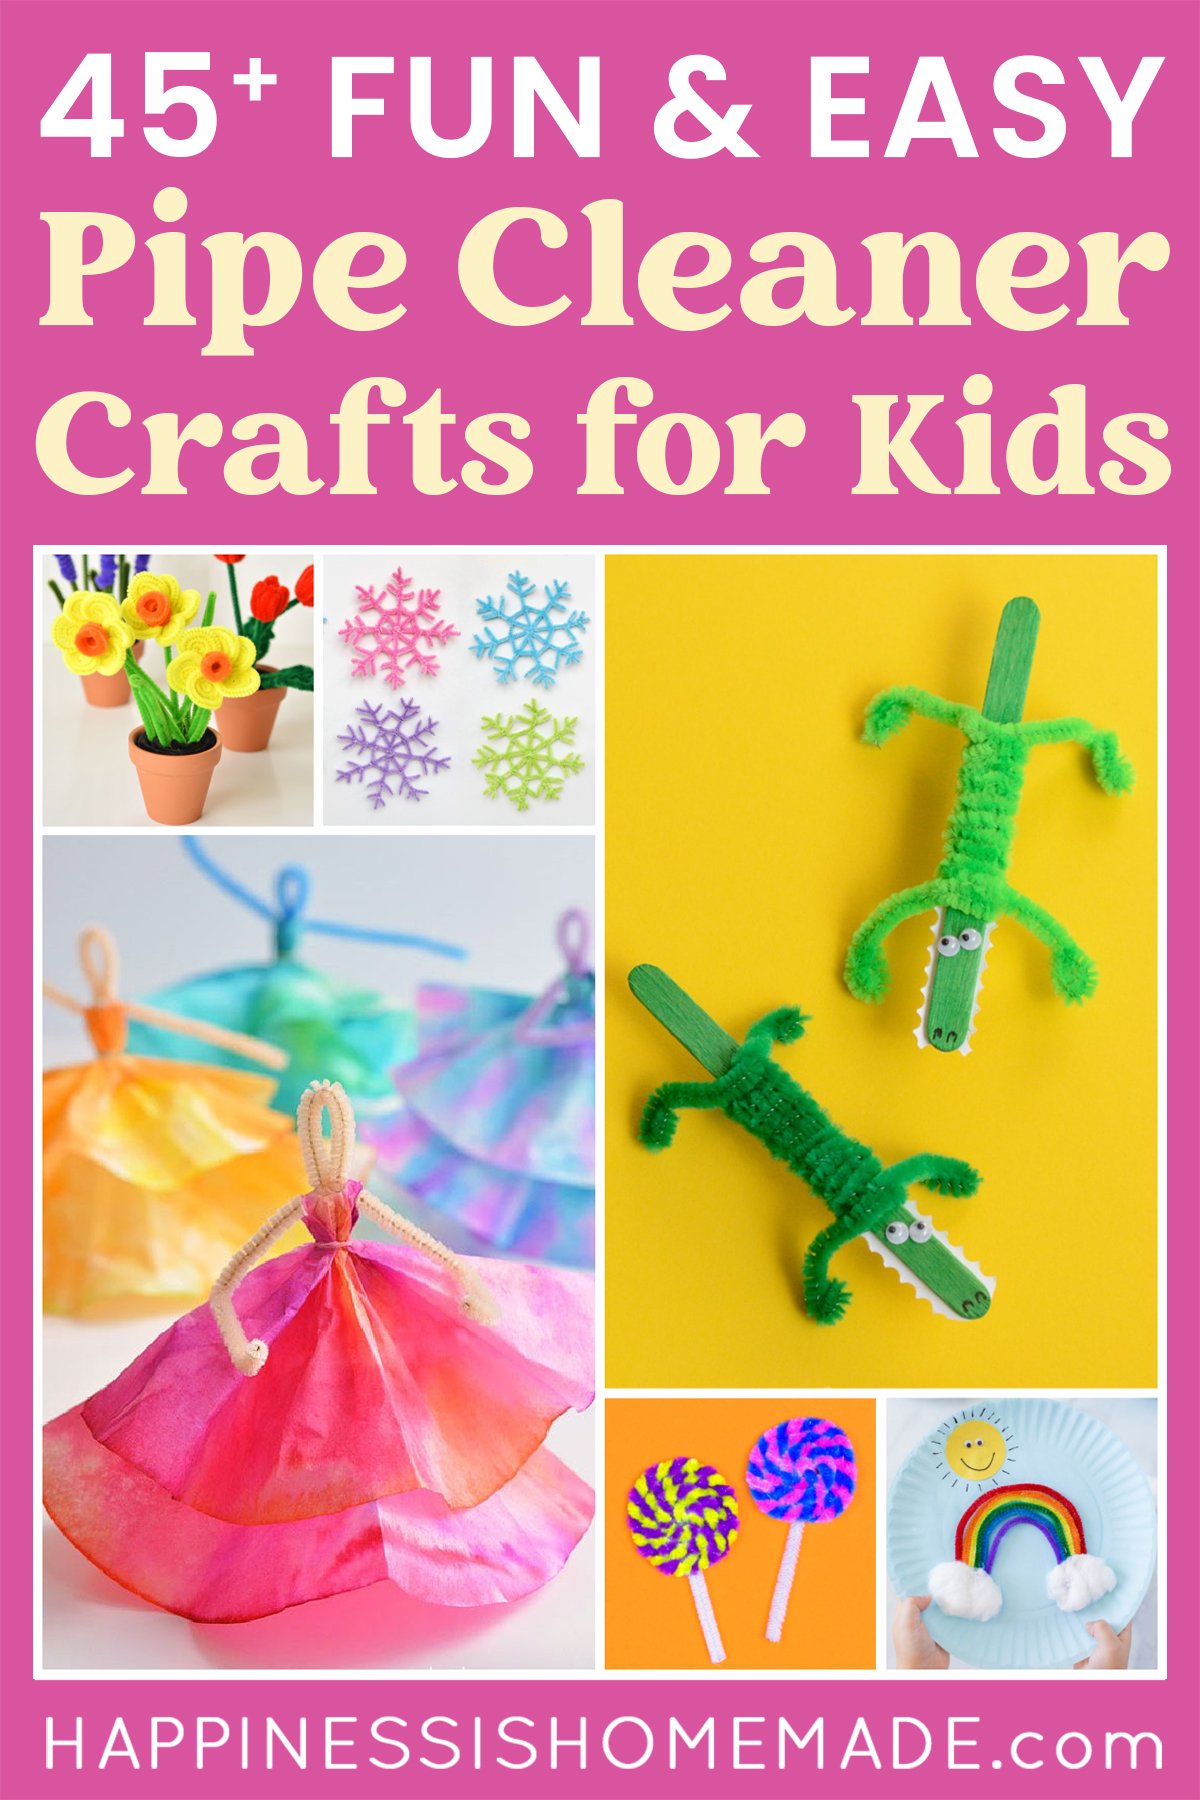 45+ Awesome Pipe Cleaner Crafts for Kids